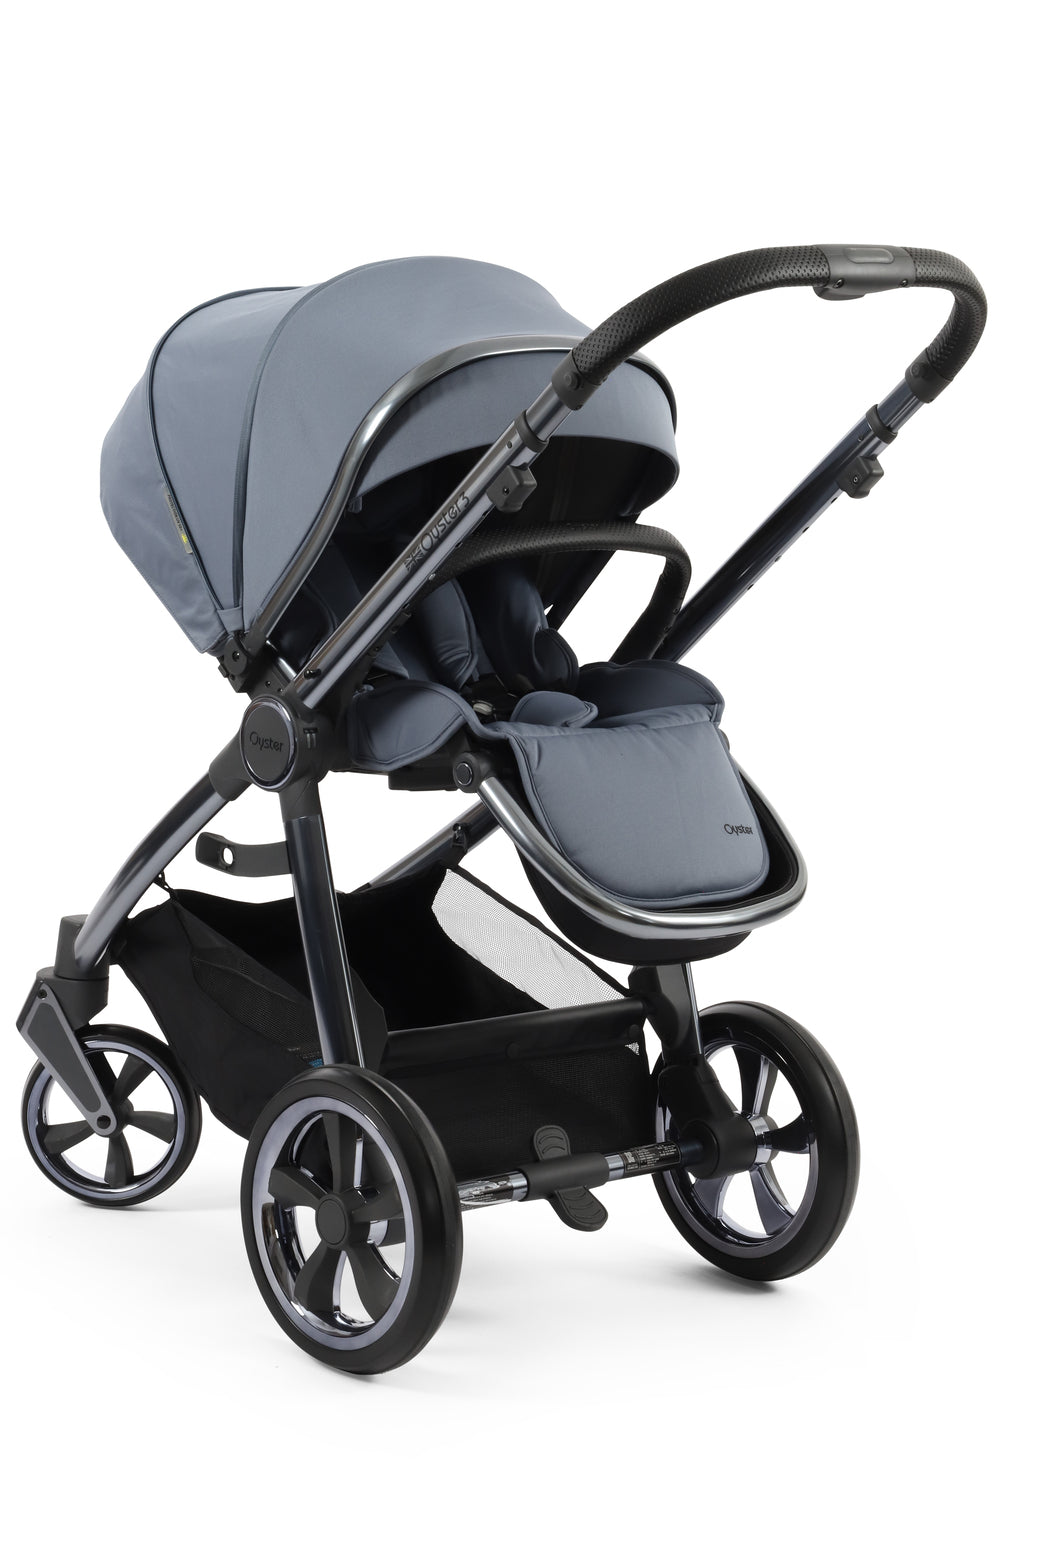 Babystyle Oyster 3 Pushchair - Dream Blue - For Your Little One